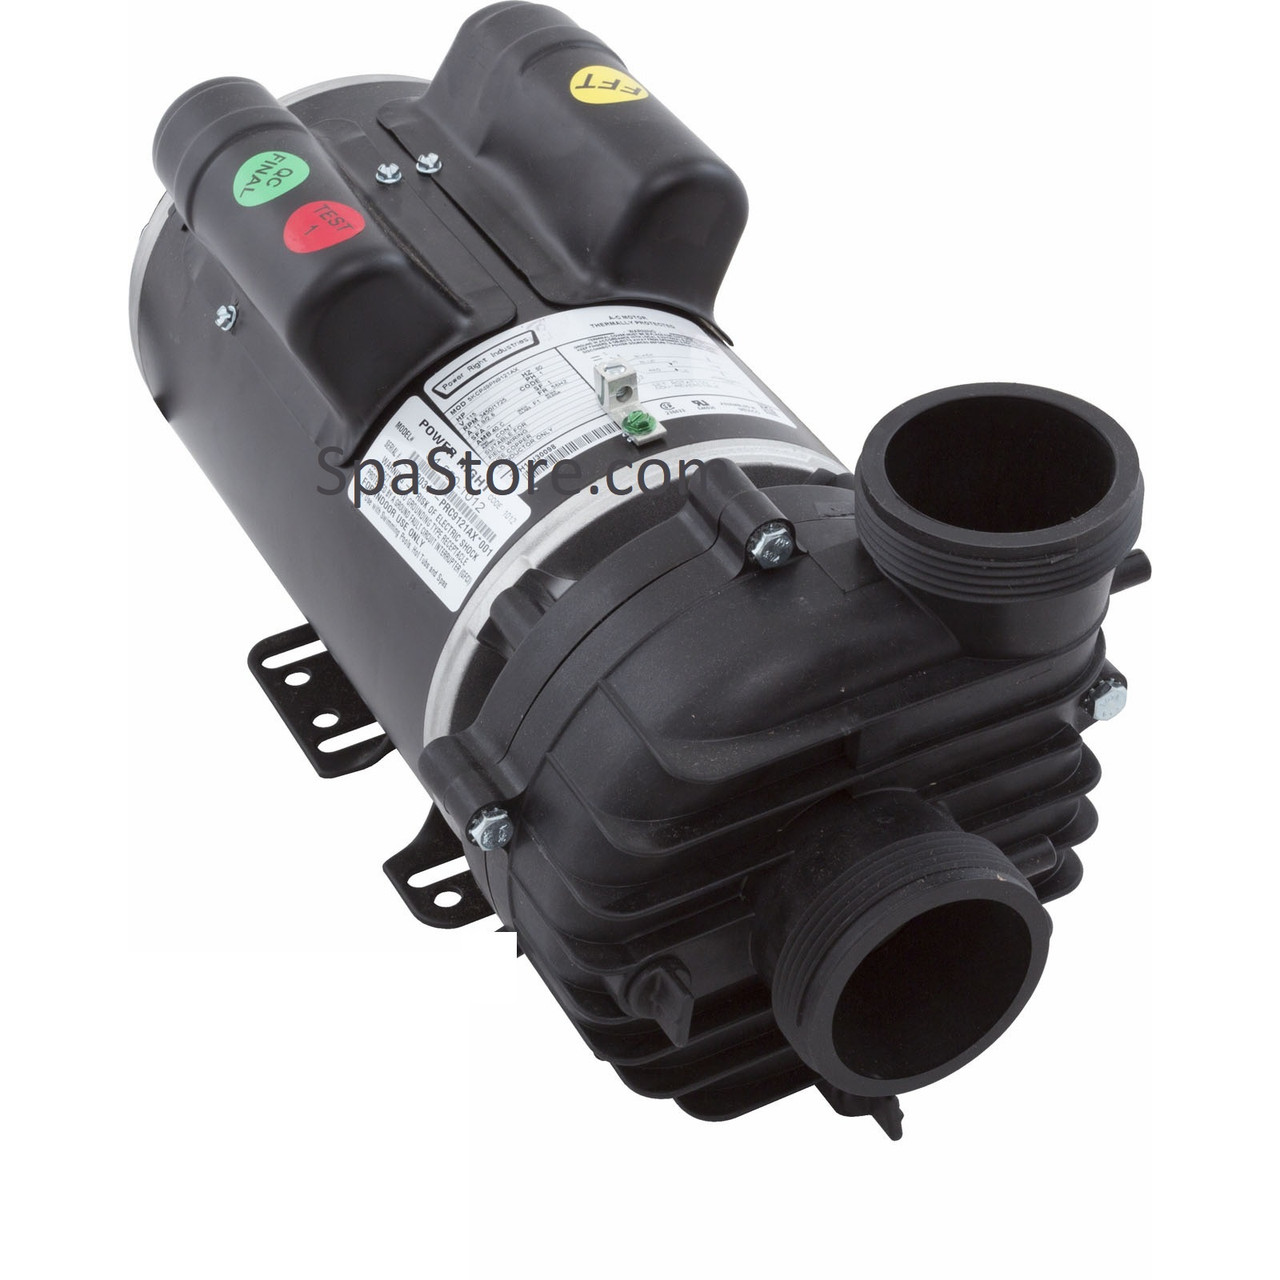 Latest Version Cal Spas Pump 2 Speed Replaced Obsolete 5KCP39TN4212X  Marathon Power Right PRC4212X 2 Speed, 230 Volt, 56 Frame, Pump/Motor.  Amps: 